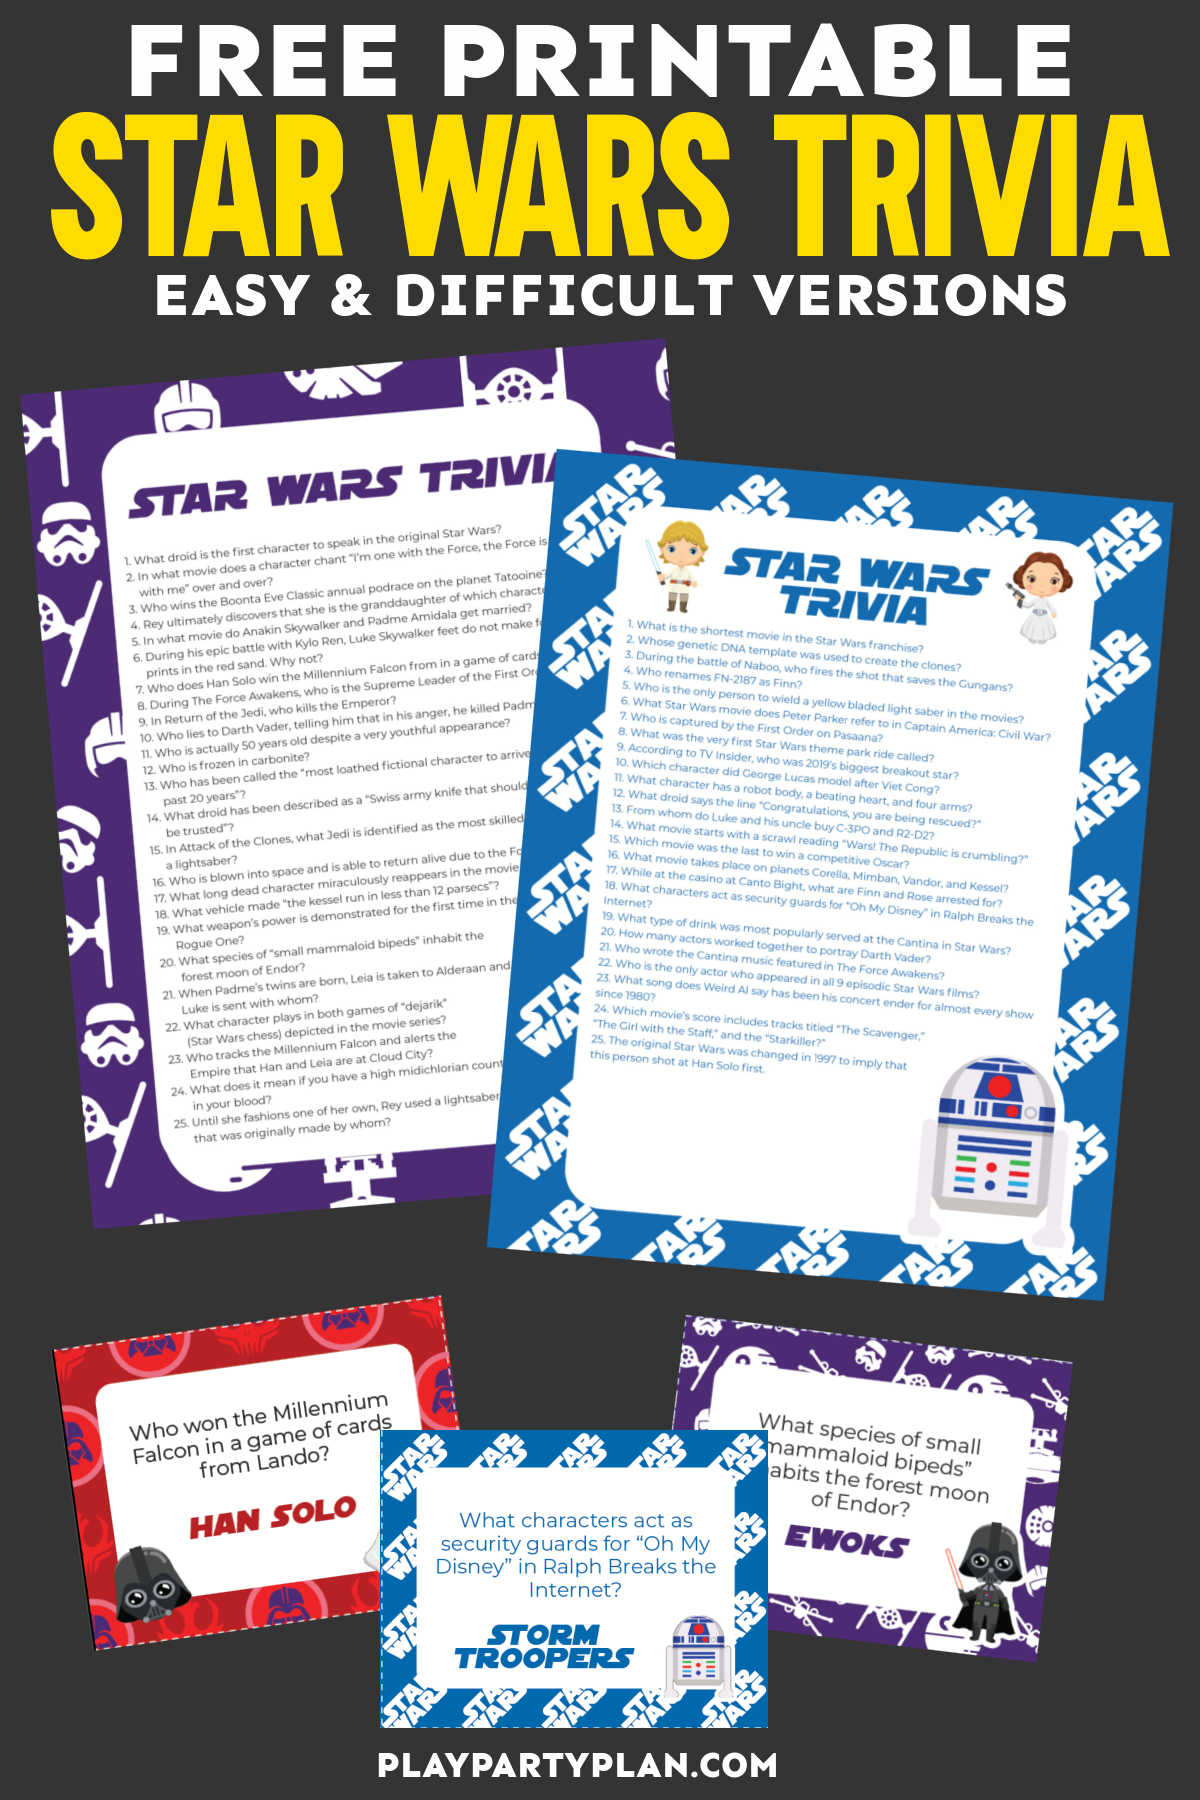 50+ Star Wars Trivia Questions & Printable Quiz - Play Party Plan